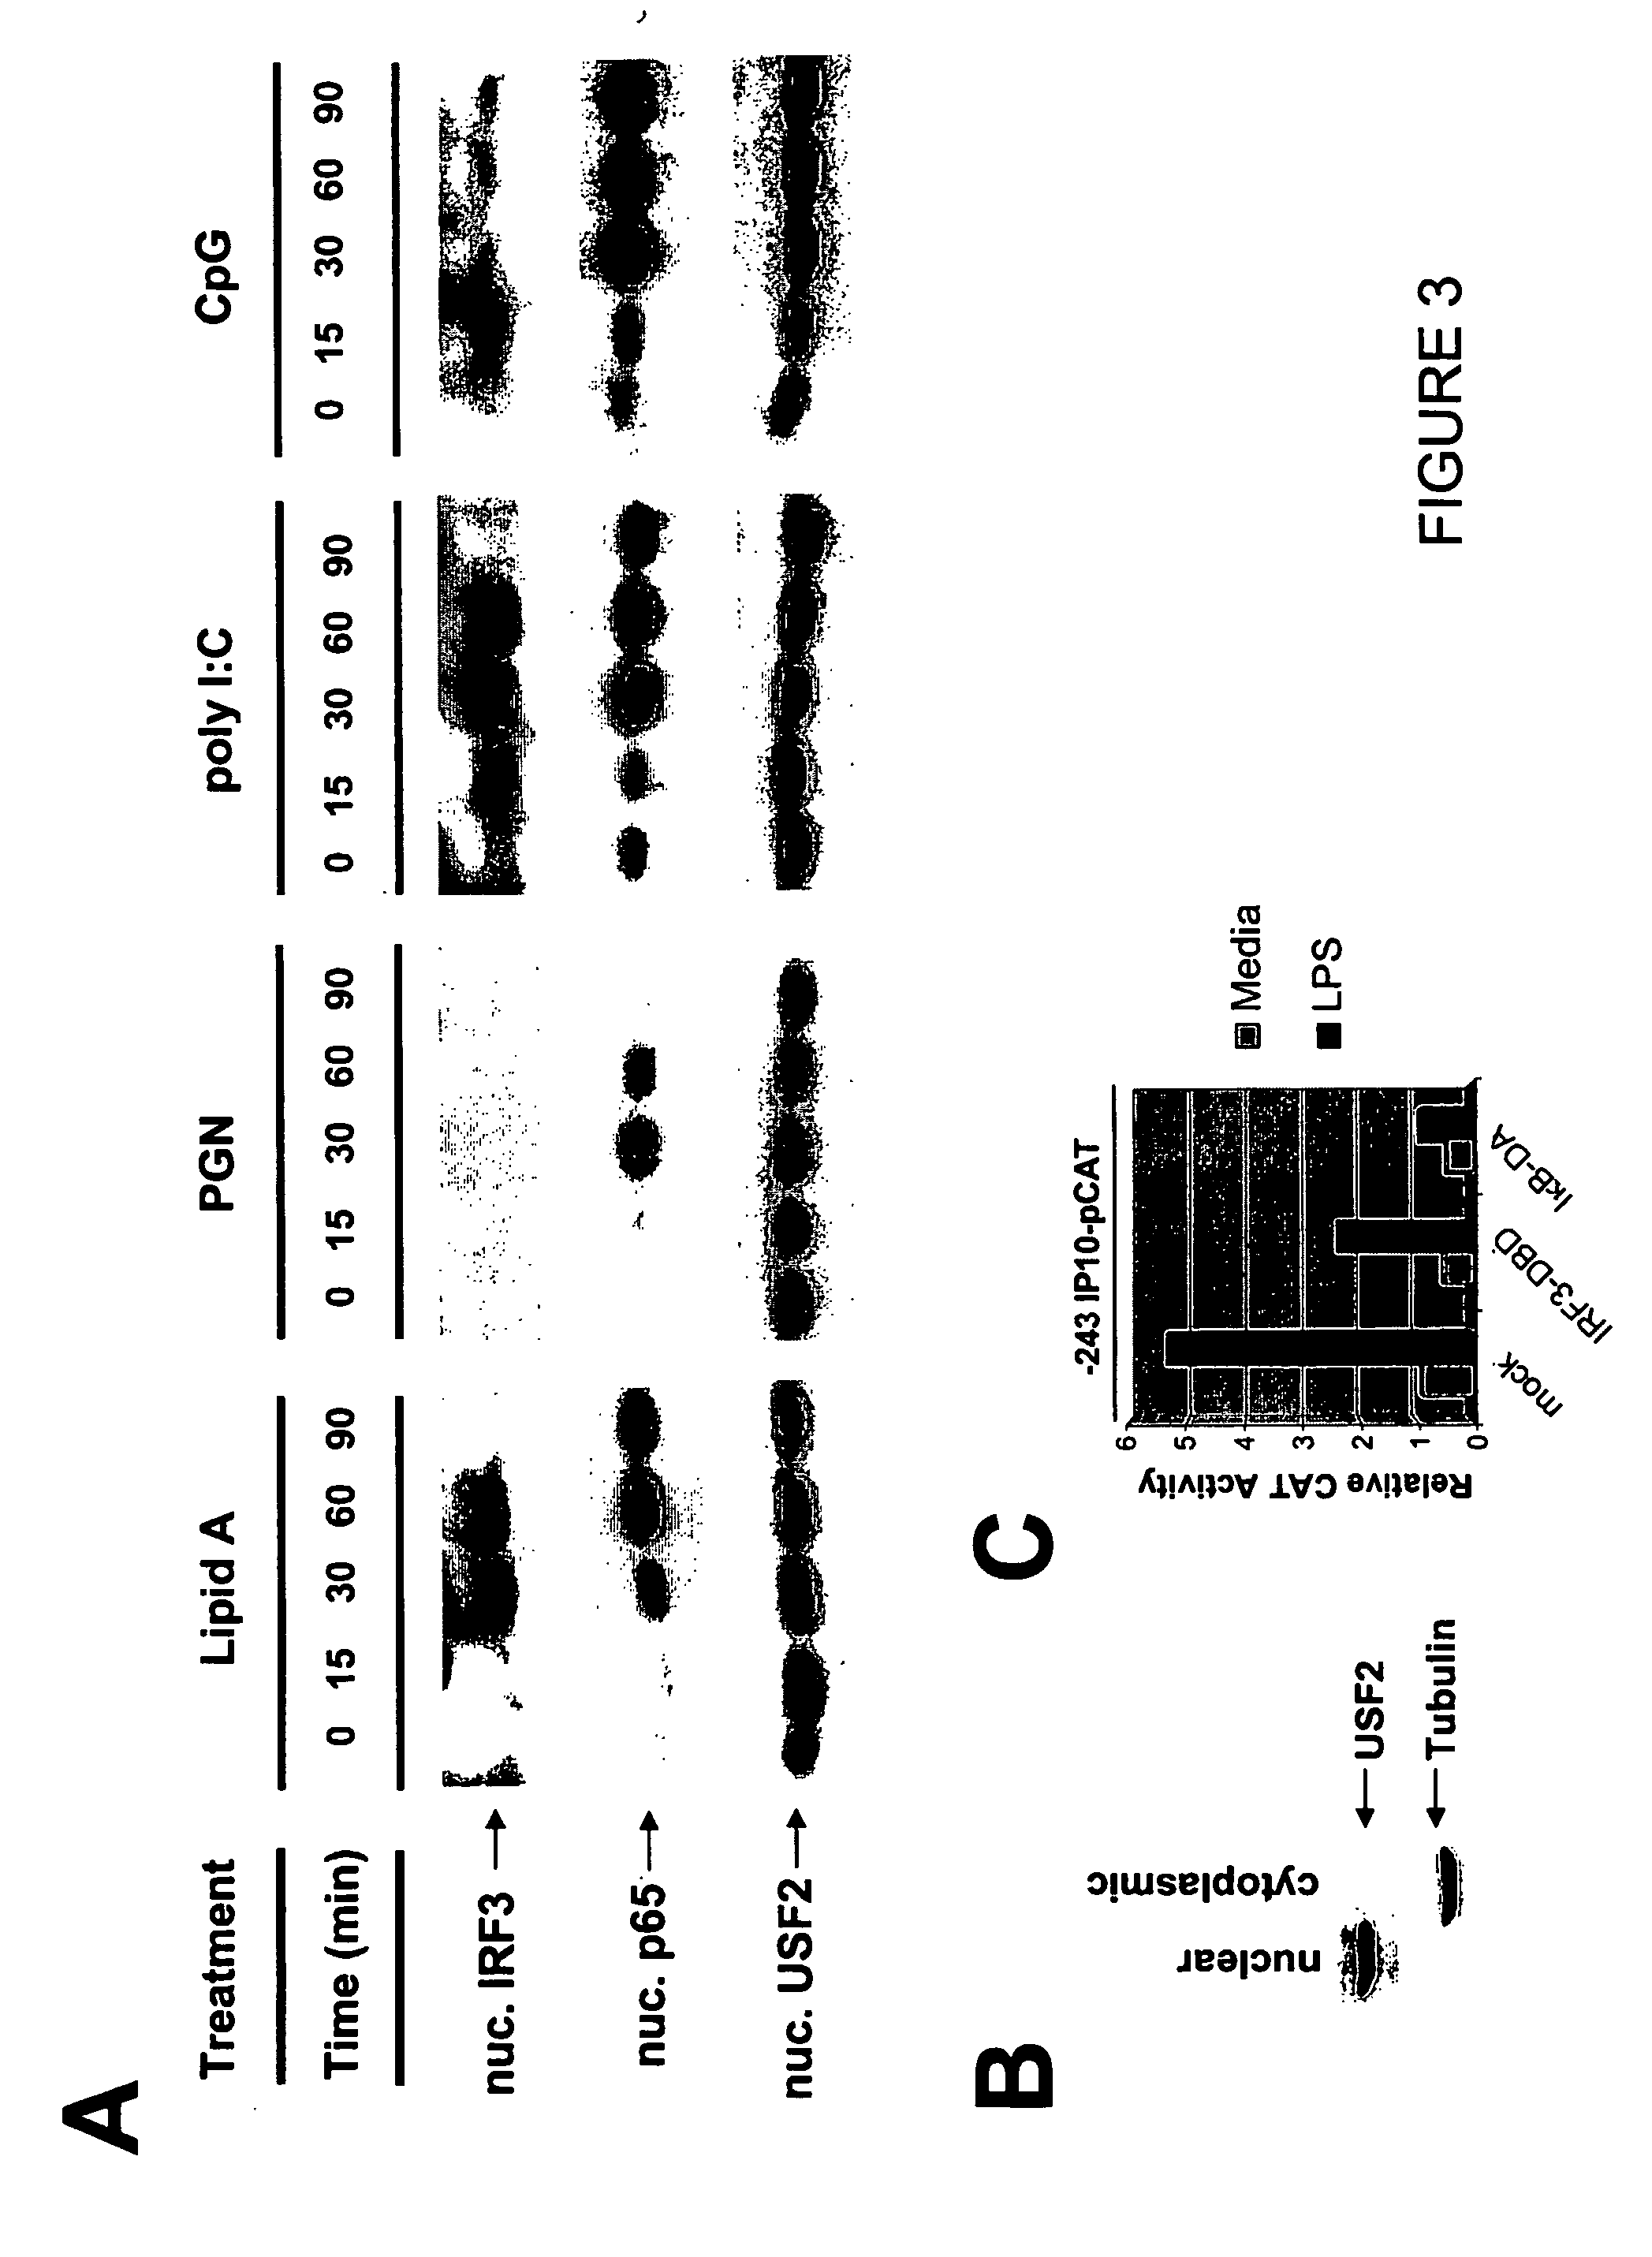 Methods for stimulating tlr irf3 pathways for inducing anti-microbial, anti-inflammatory and anticancer responses